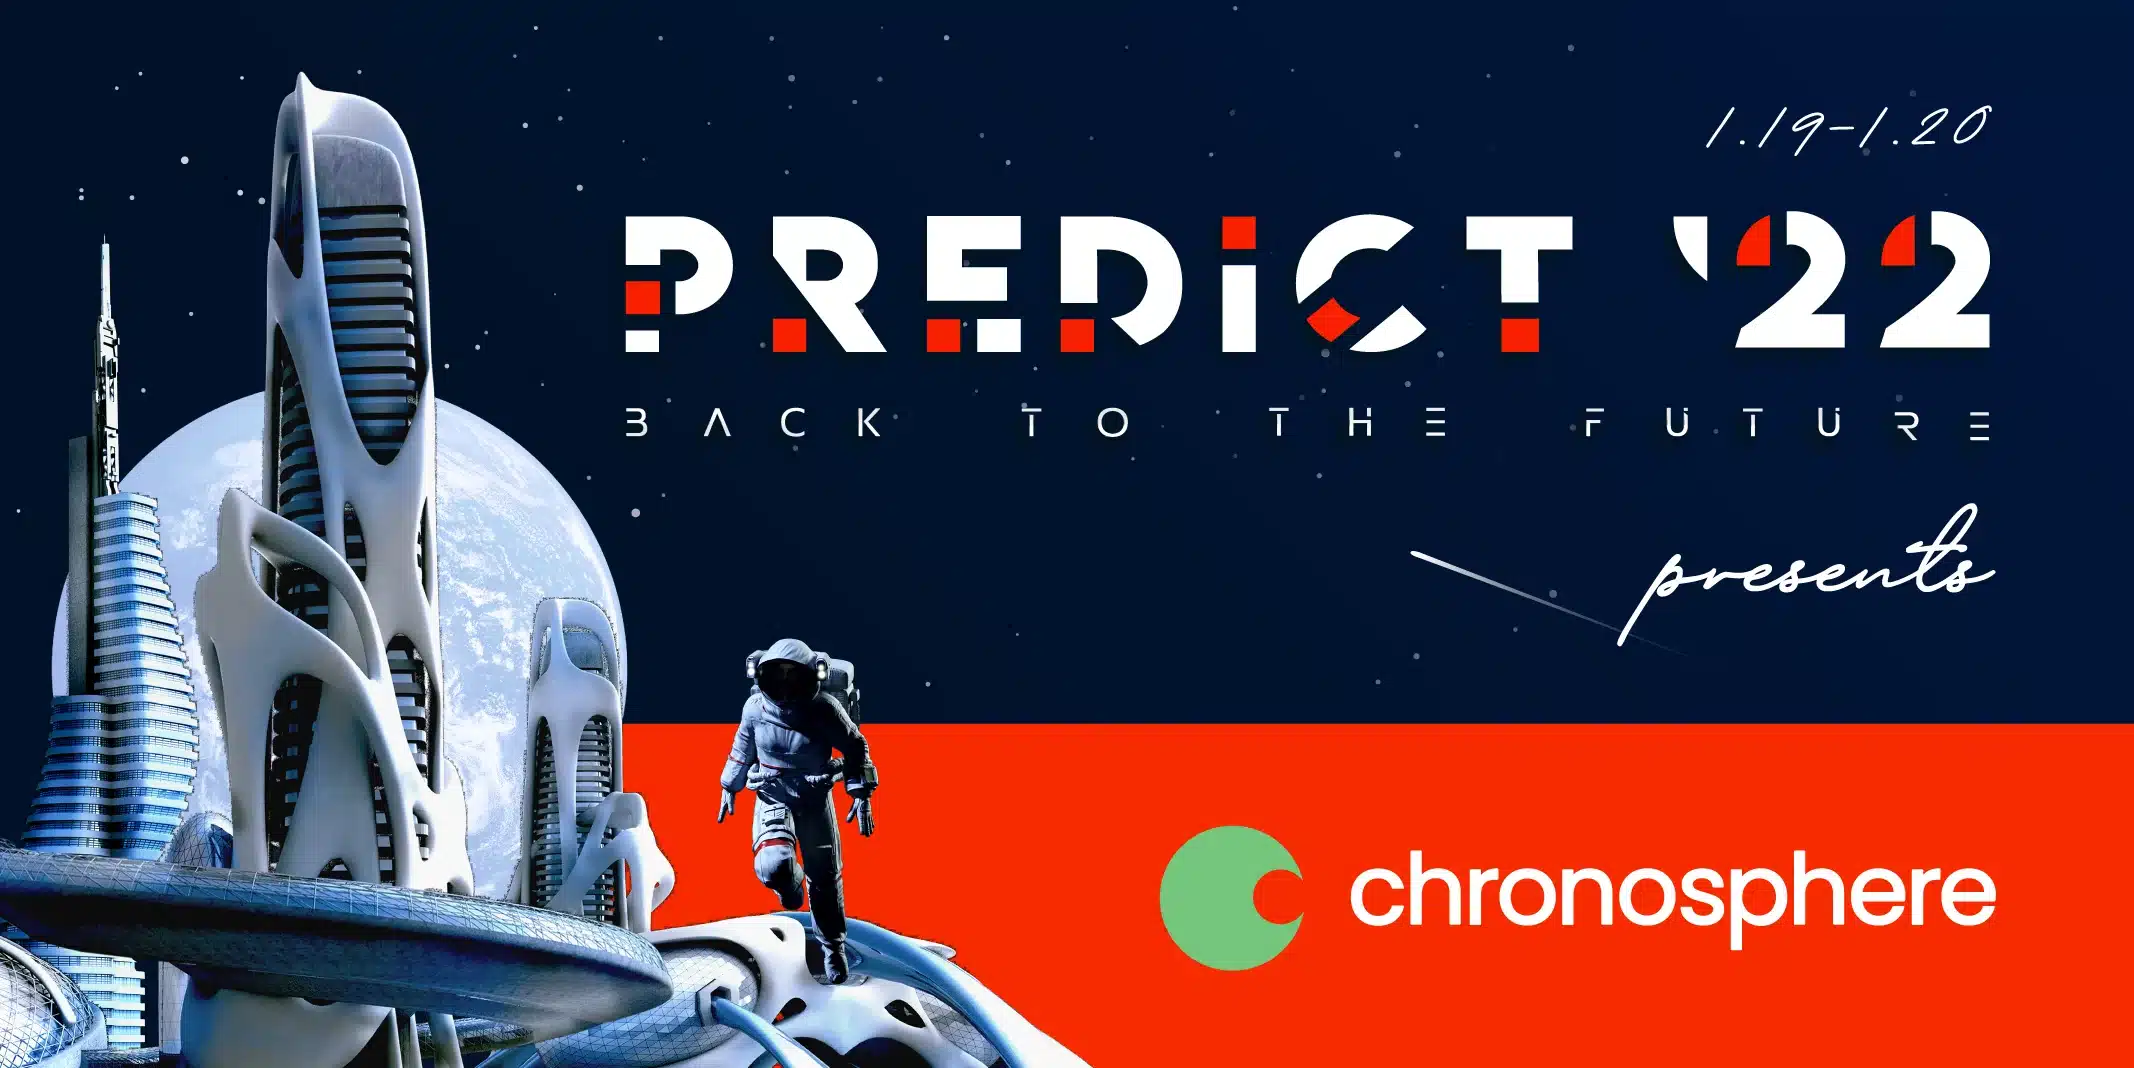 The Chronosphere presents Predict v2 Back to the Future, an on-demand session at the Predict 2022 Virtual Summit.